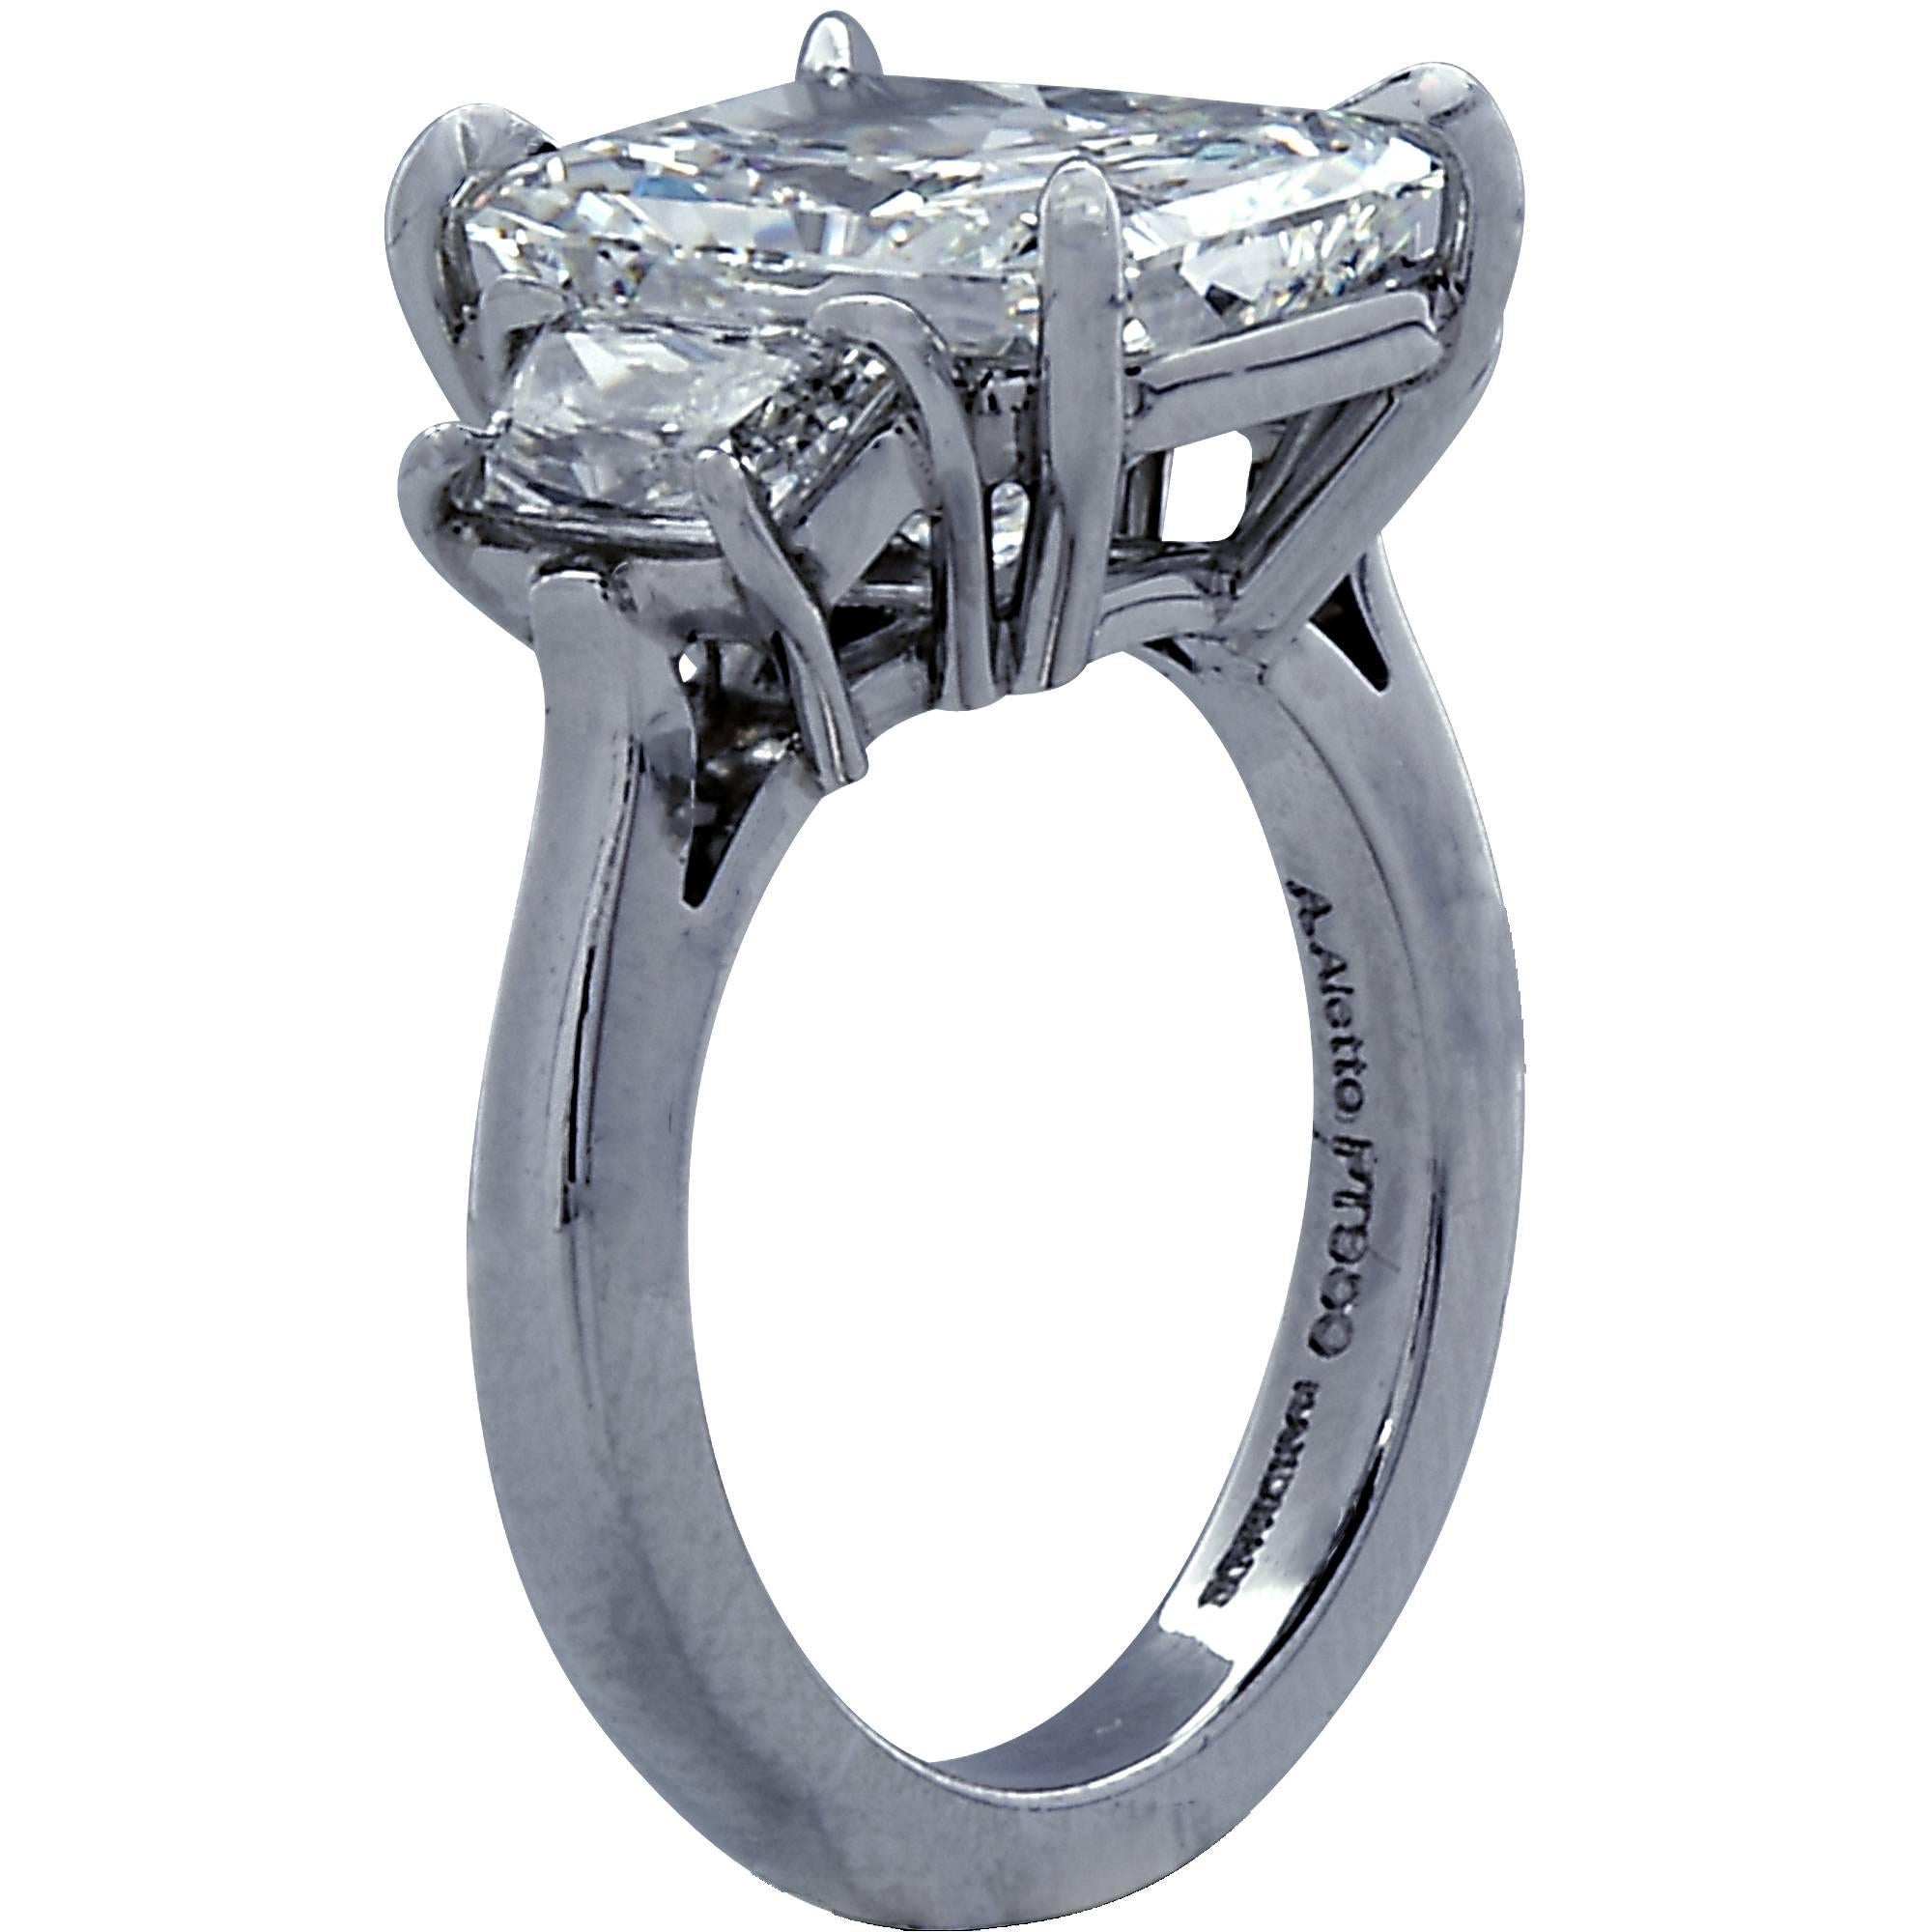 Platinum handmade ring featuring a GIA graded 5.55ct rectangular radiant cut diamond I color and SI1 clarity flanked by 2 trapezoid brilliant cut diamonds weighing 1.13ct.

The ring is a size 5 and can be sized up or down.
It is stamped and/or